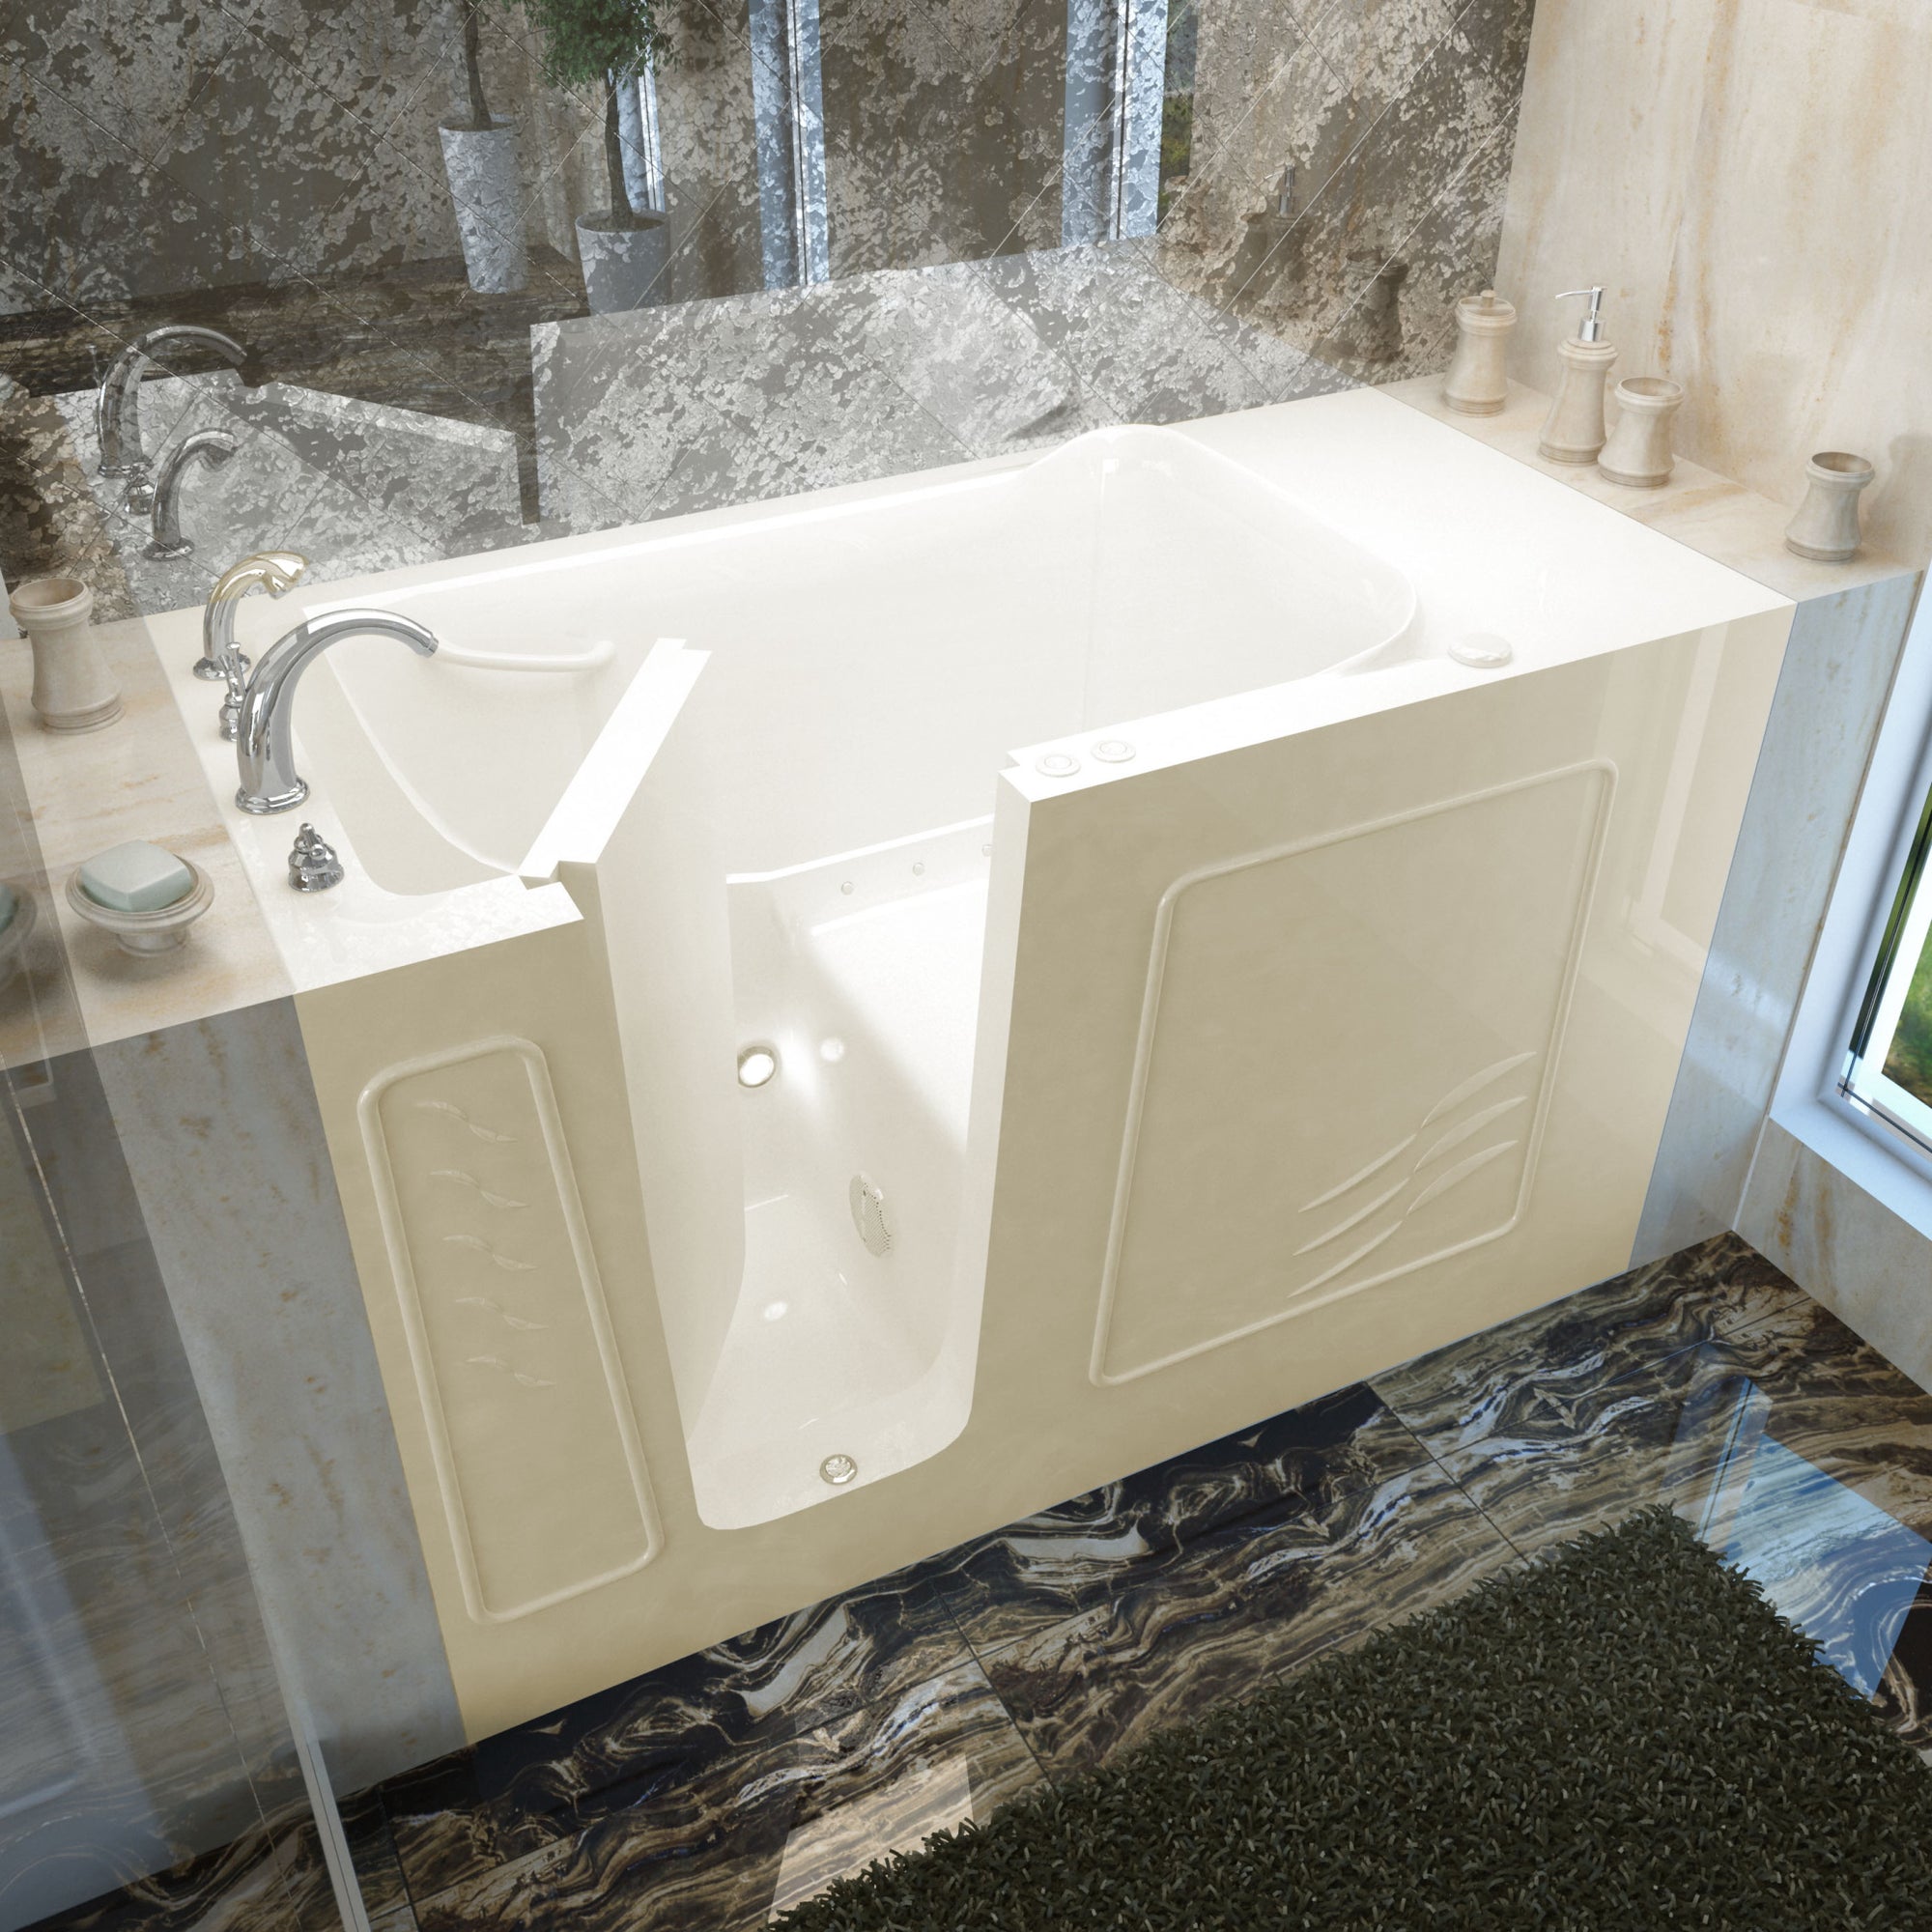 Meditub 30 x 60 Walk-In Bathtub - High-grade marine fiberglass with triple gel coating - Biscuit finish - Inward swinging door - Left side drain - with 5.5 in. Threshold & 17 in. Seat Height, built-in grab bar - Air Jetted - Lifestyle -3060WI - Vital Hydrotherapy